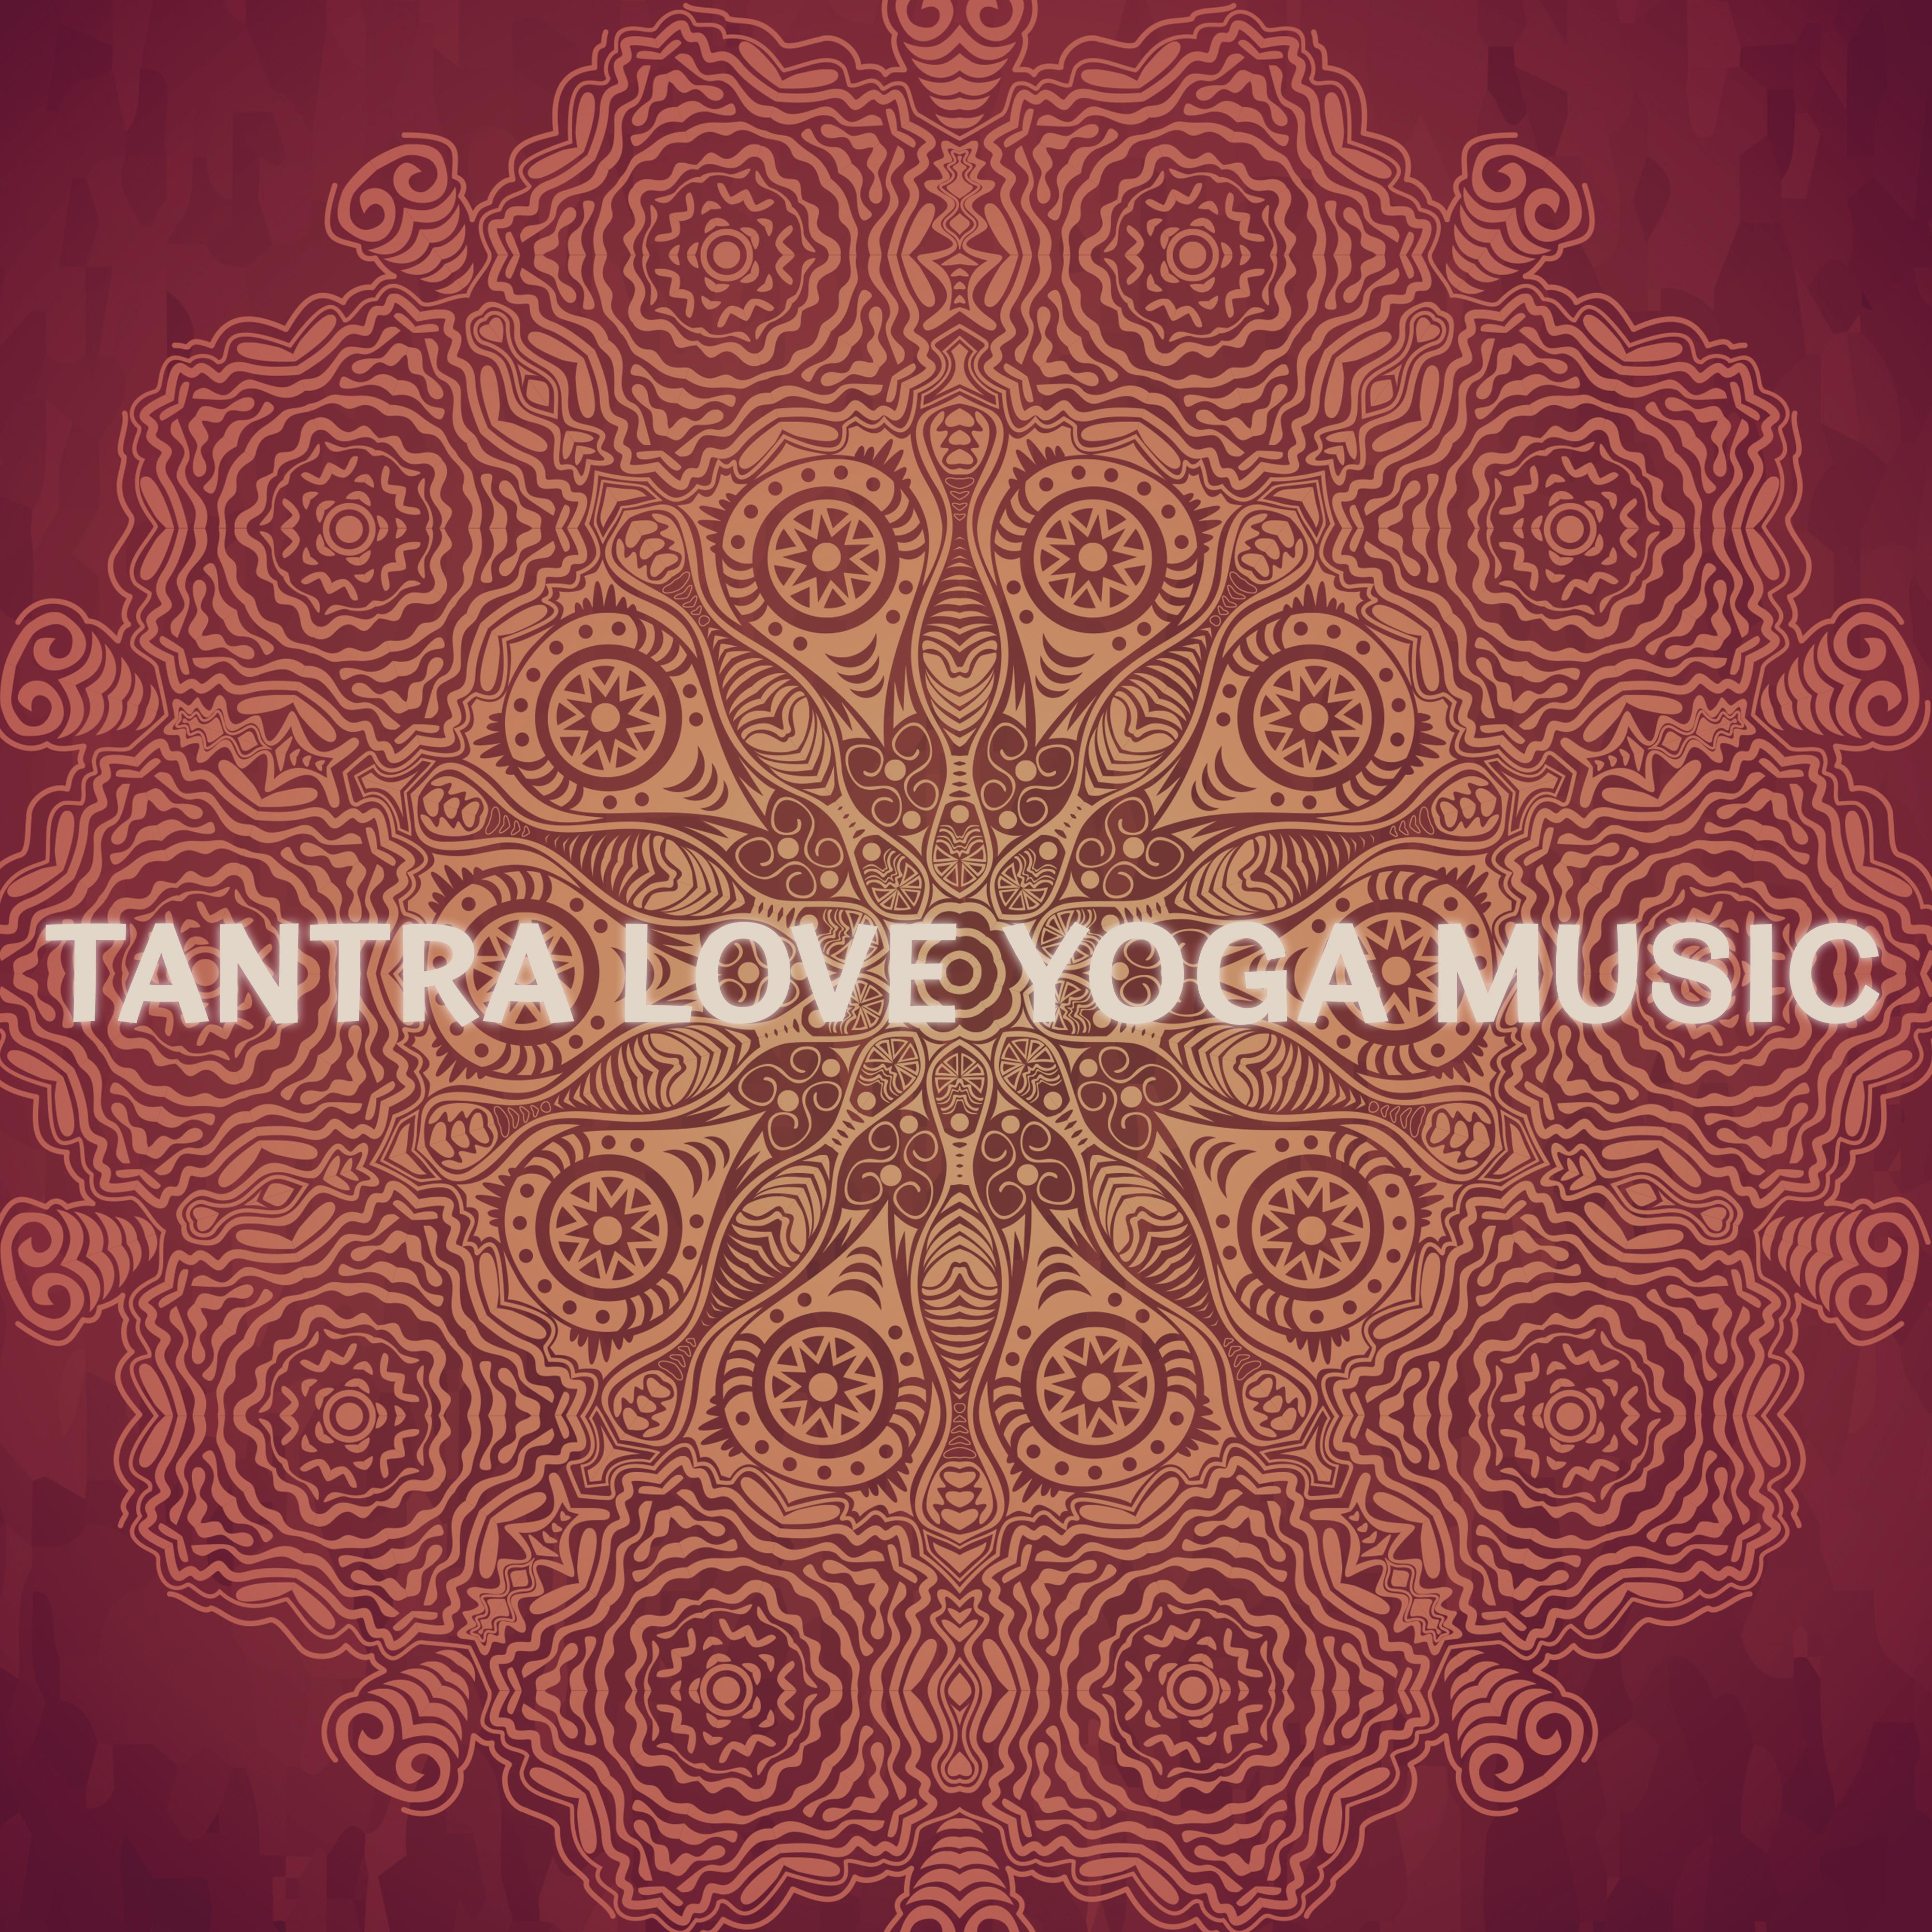 Tantra Love Yoga Music  Sensual New Age Music, Tantra Music, Instrumental Sounds, Soothing Yoga Music